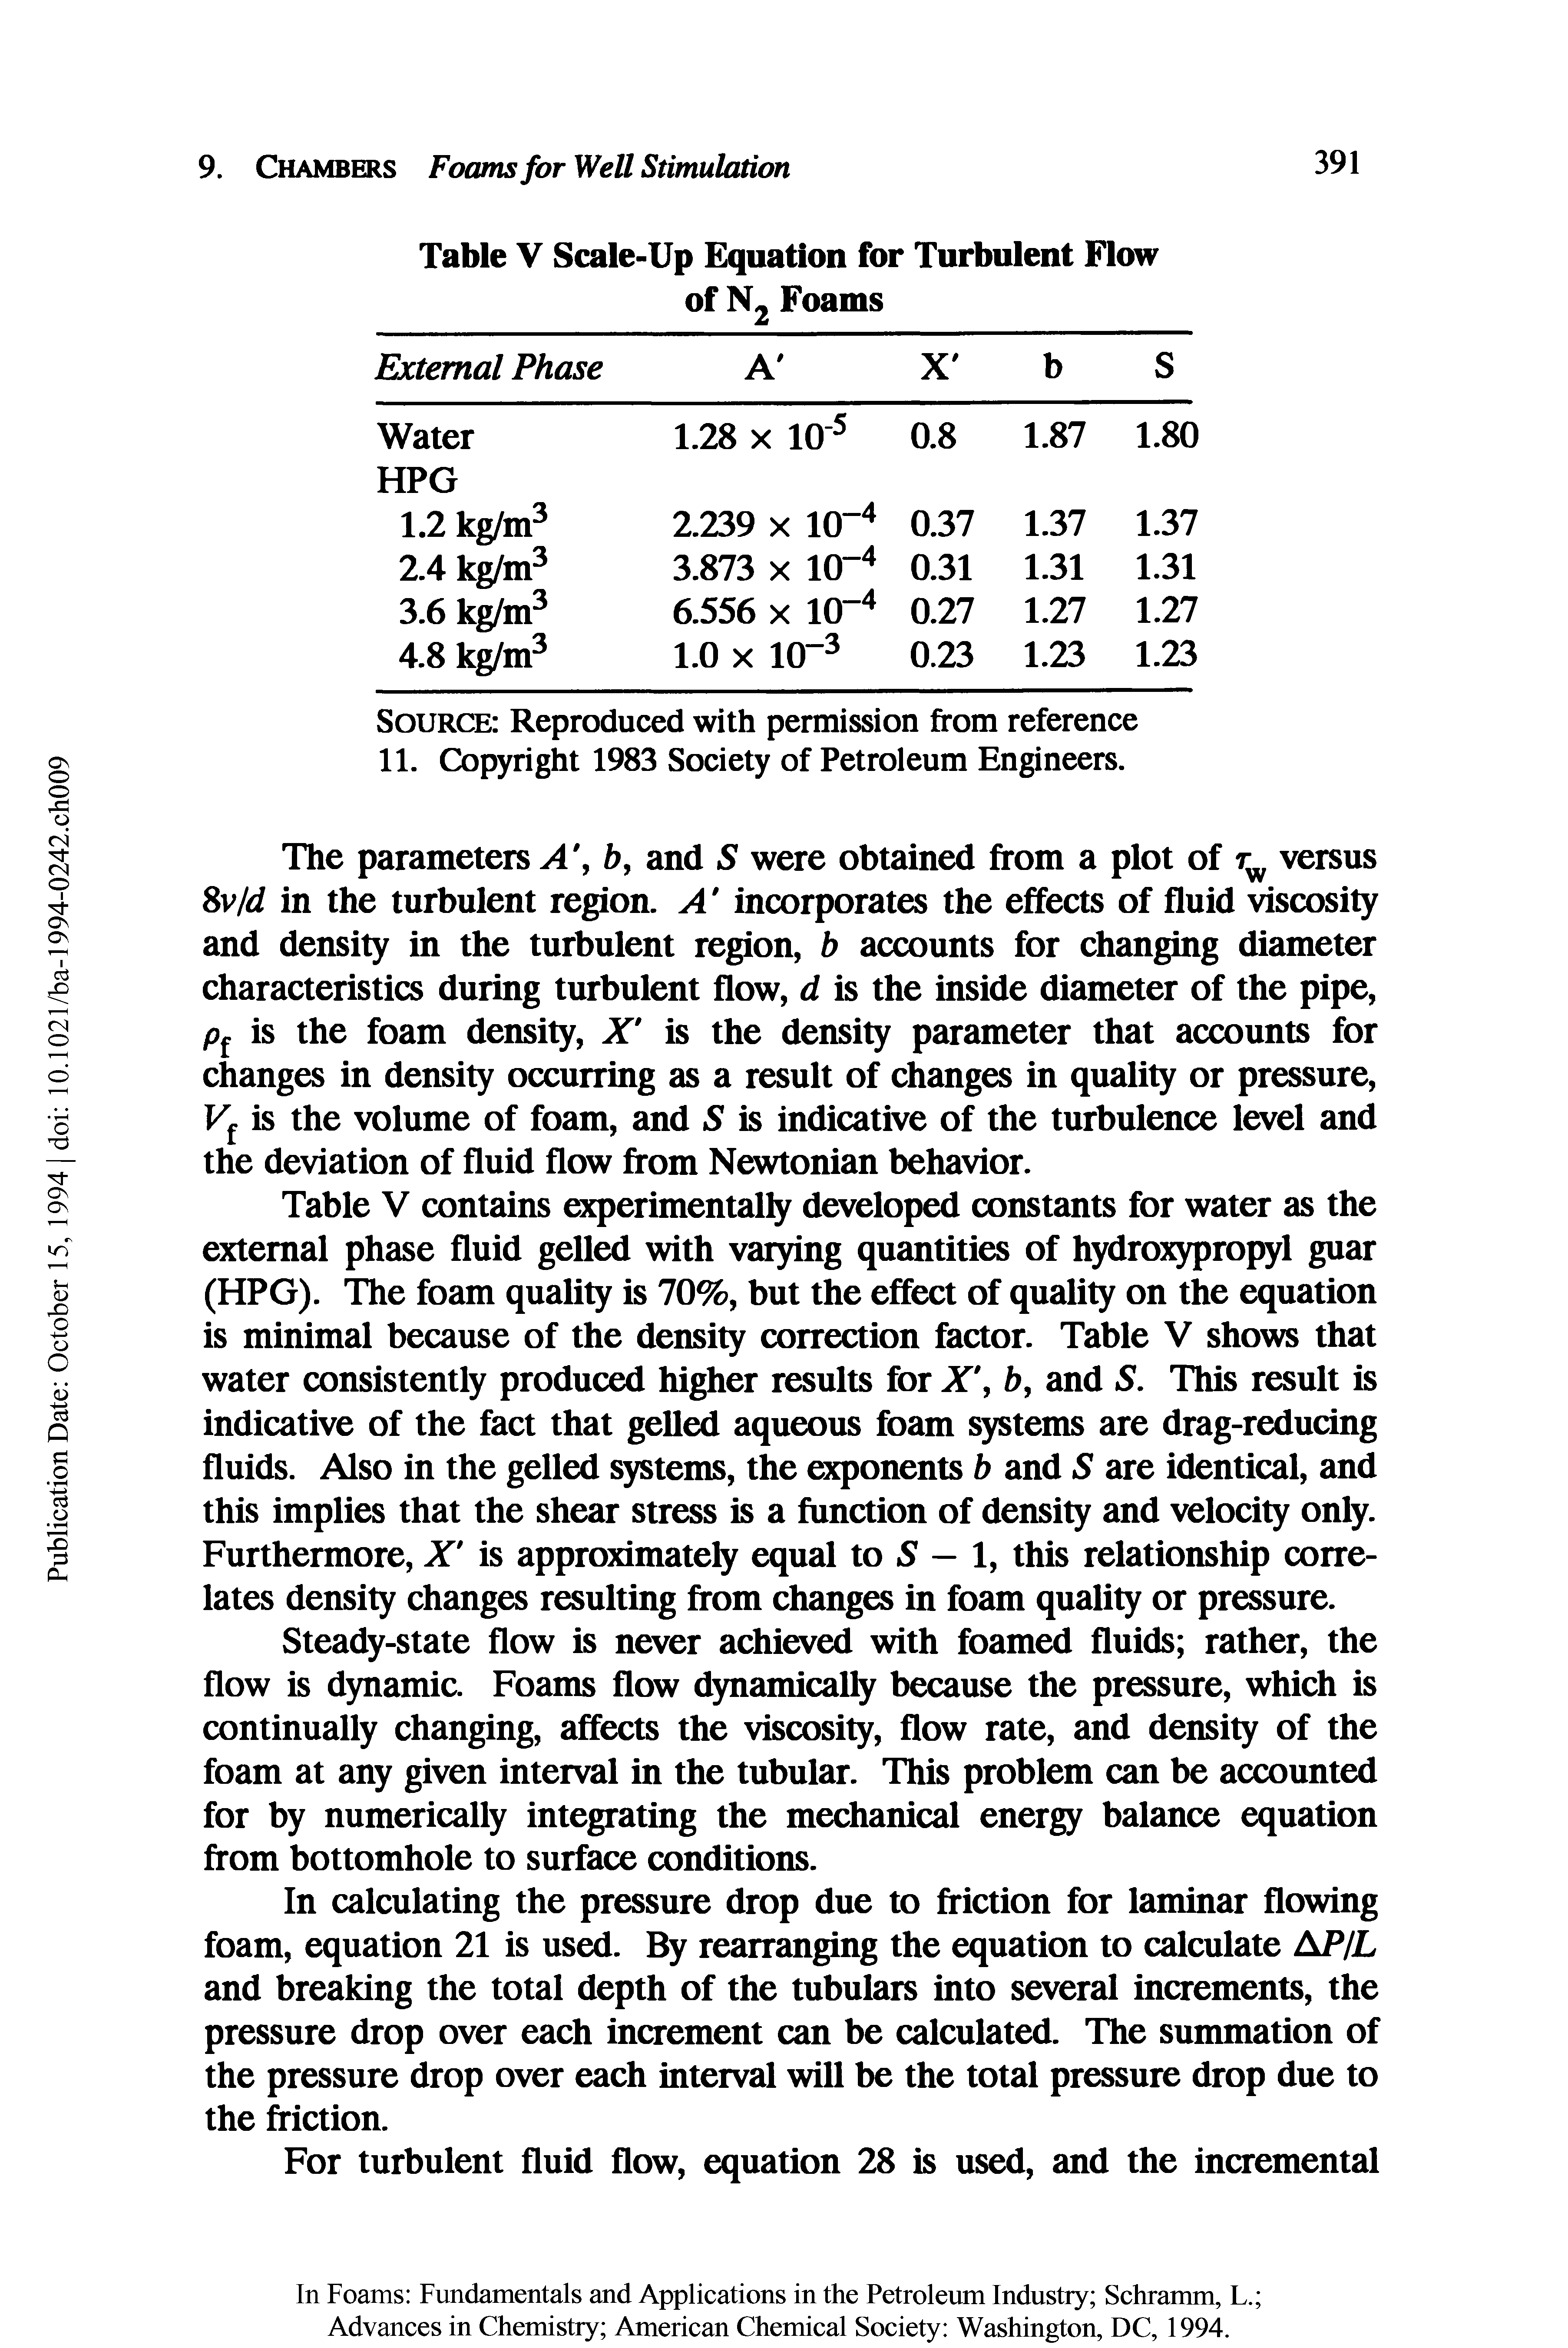 Table V contains experimentally developed constants for water as the external phase fluid gelled with varying quantities of hydroxypropyl guar (HPG). The foam quality is 70%, but the effect of quality on the equation is minimal because of the density correction factor. Table V shows that water consistently produced higher results for X, b, and S. This result is indicative of the fact that gelled aqueous foam systems are drag-reducing fluids. Also in the gelled systems, the exponents b and S are identical, and this implies that the shear stress is a function of density and velocity only. Furthermore, X is approximately equal to S — 1, this relationship correlates density changes resulting from changes in foam quality or pressure.